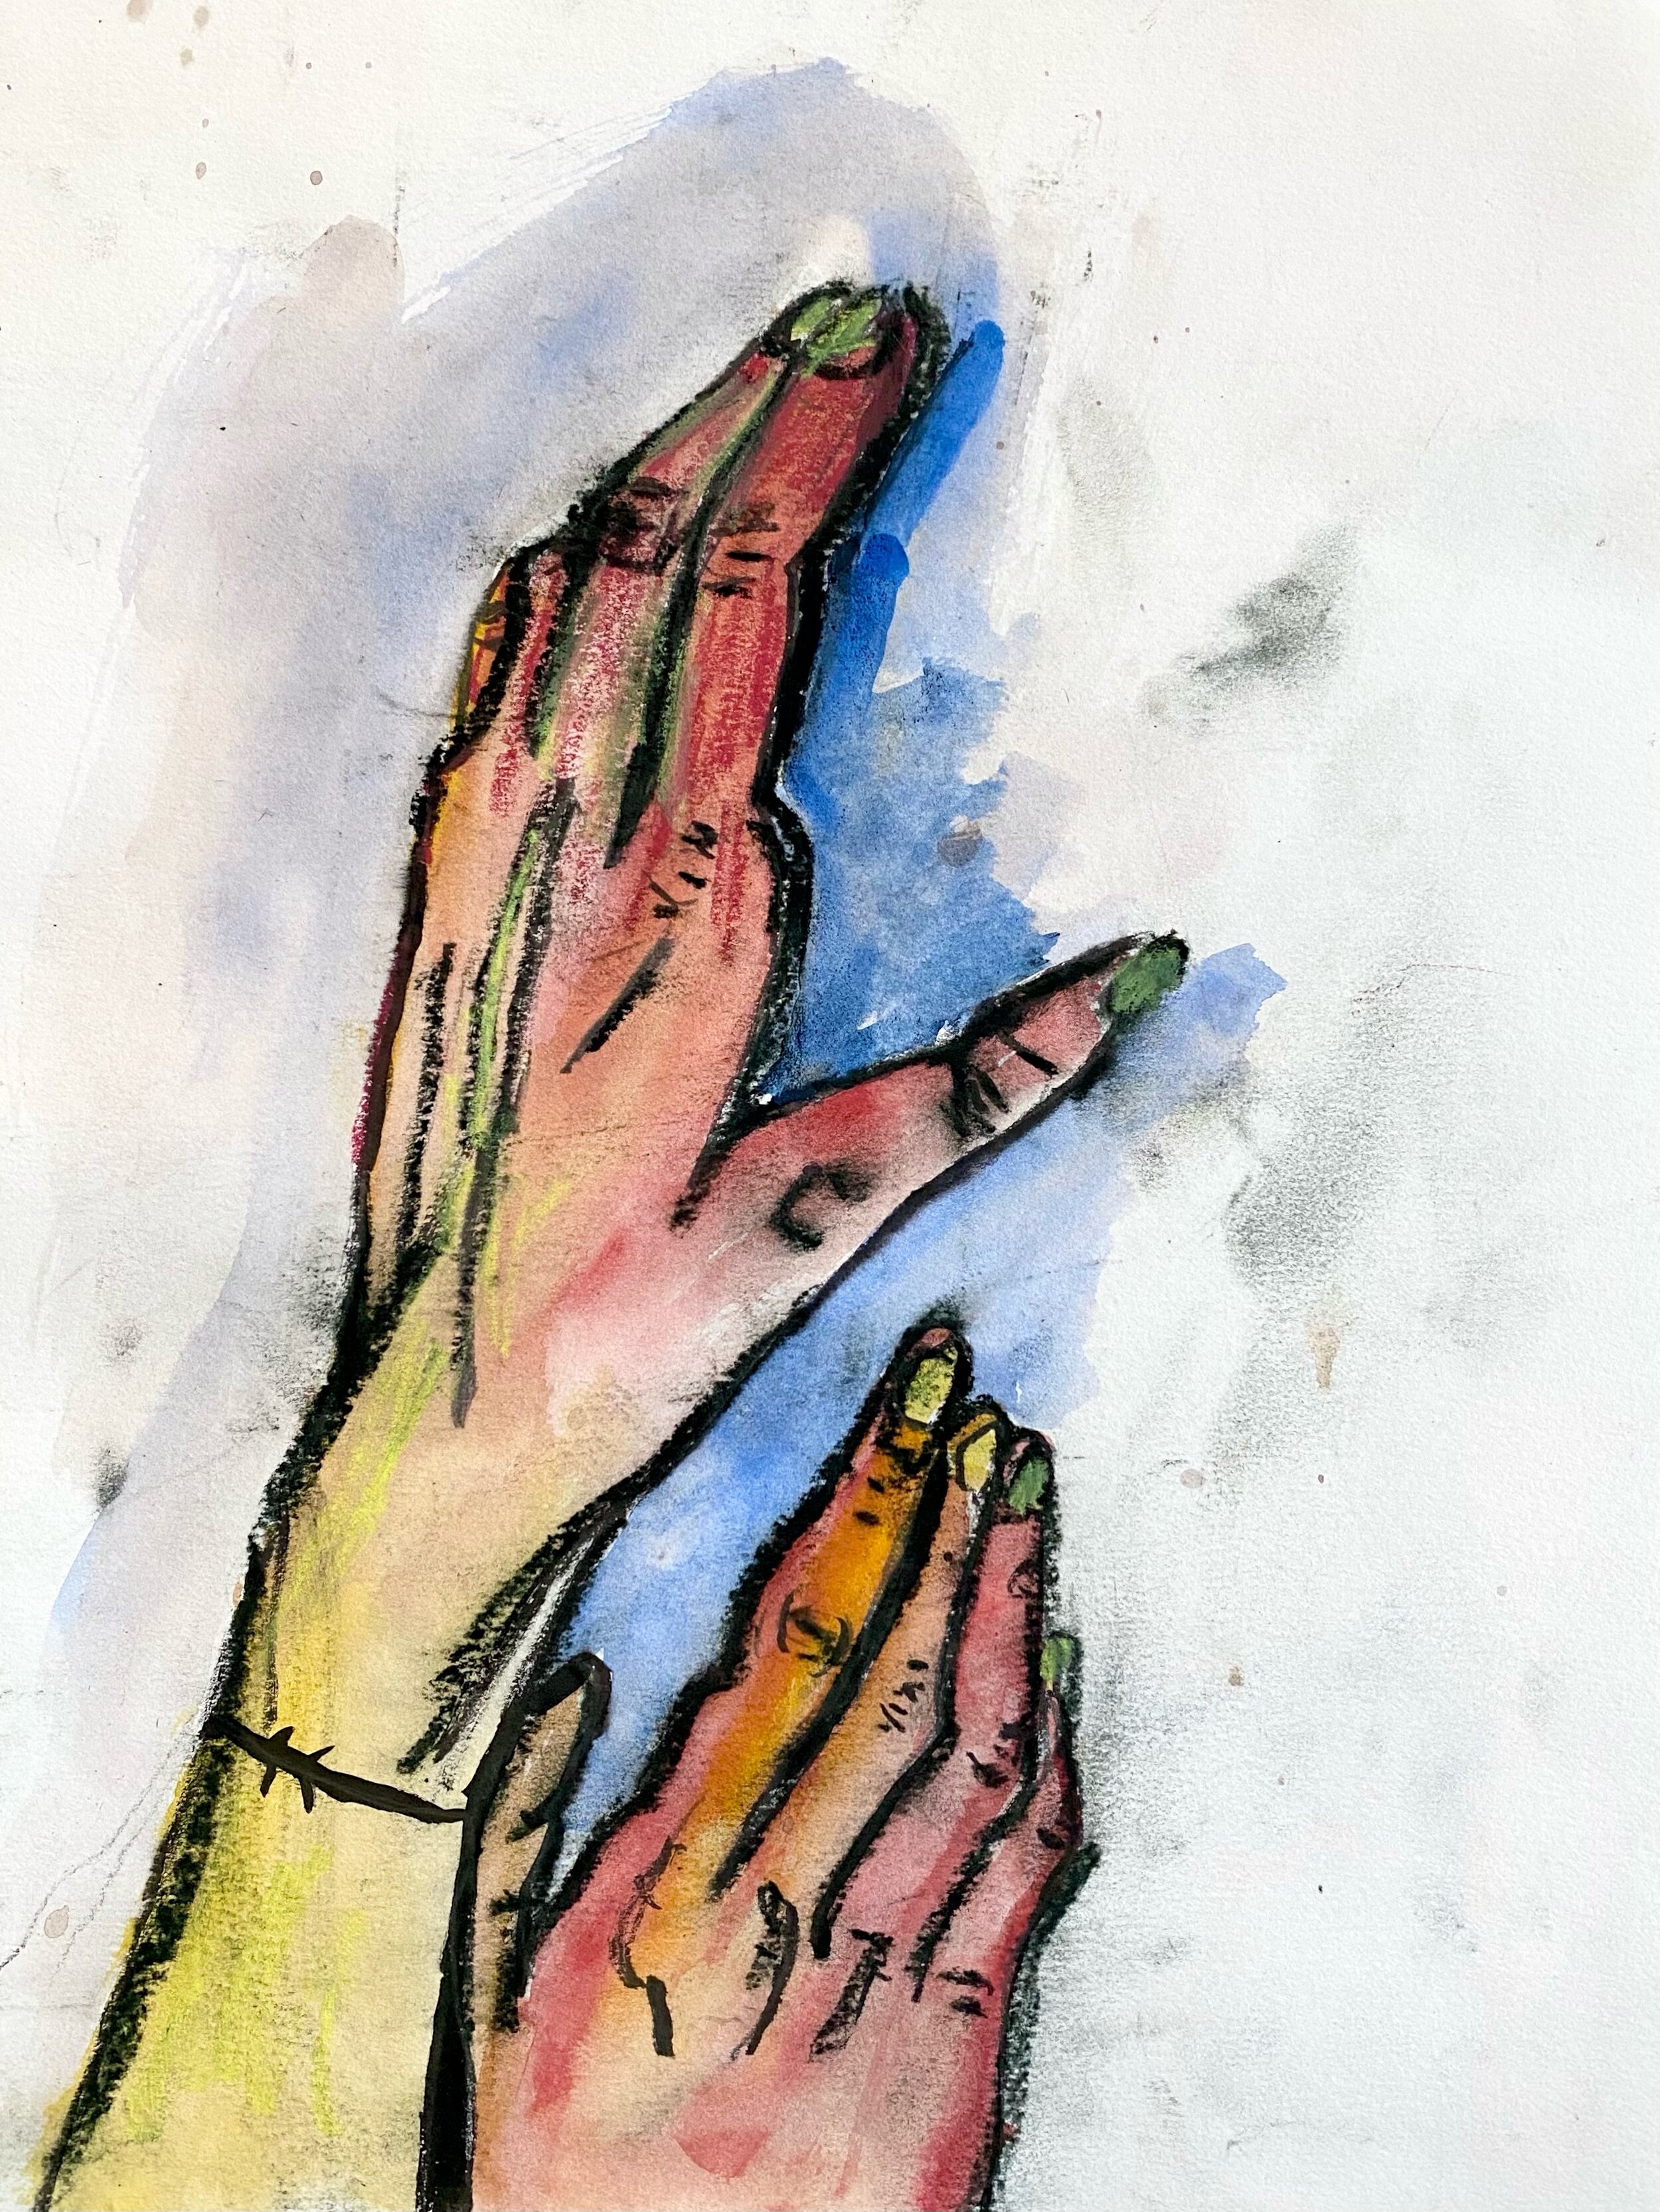 Hands+Reaching+12%22+x+9%22+watercolor+and+pastel+on+paper.jpg